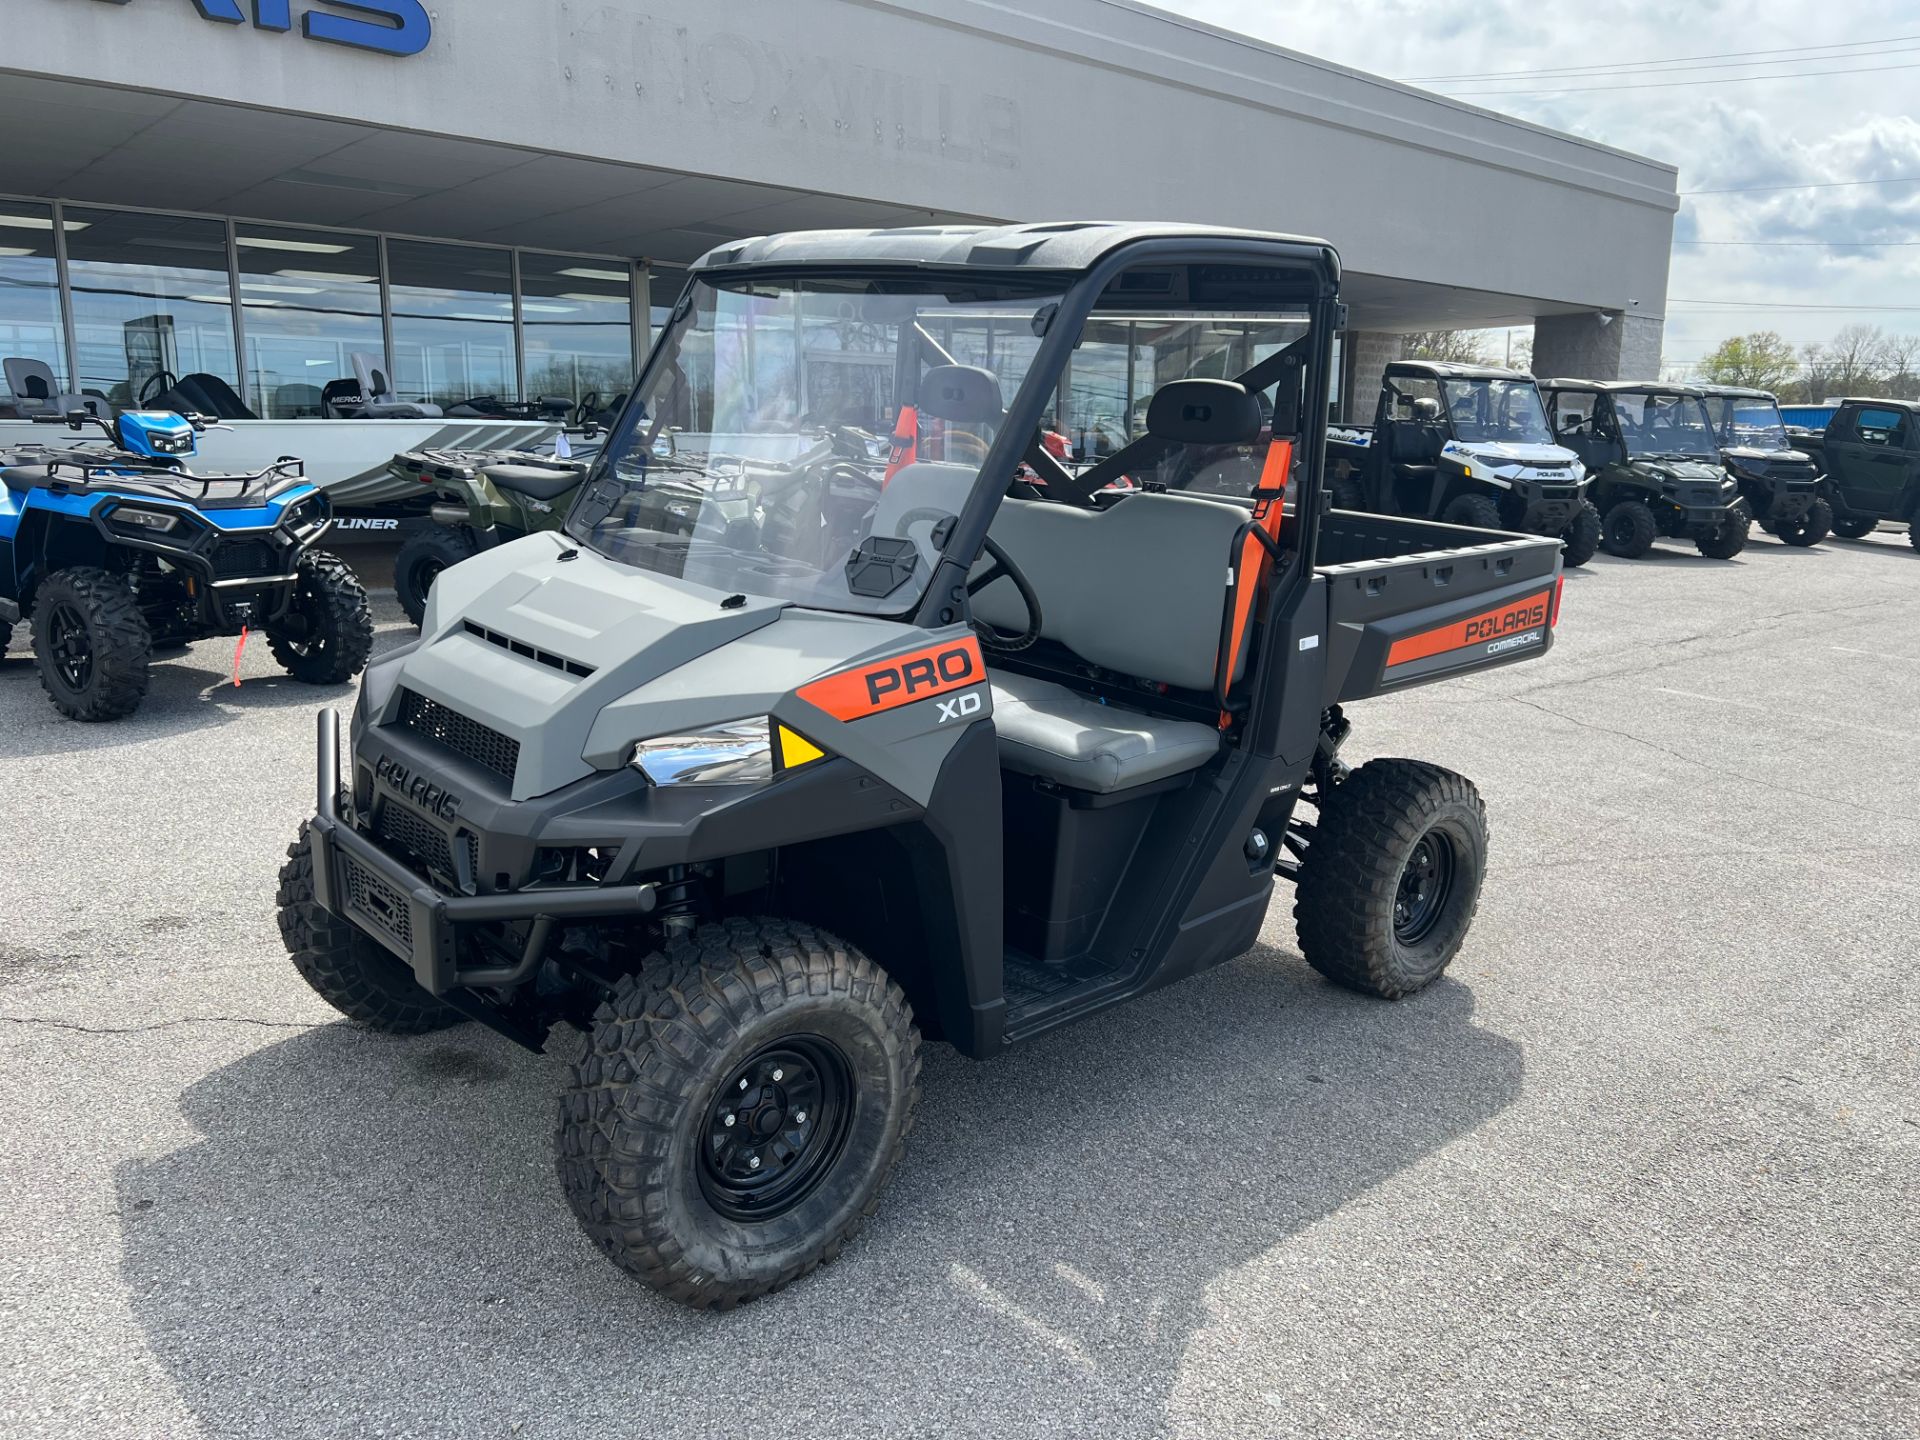 2022 Polaris Commercial Pro XD Full Size Diesel with Heater Kit in Knoxville, Tennessee - Photo 1